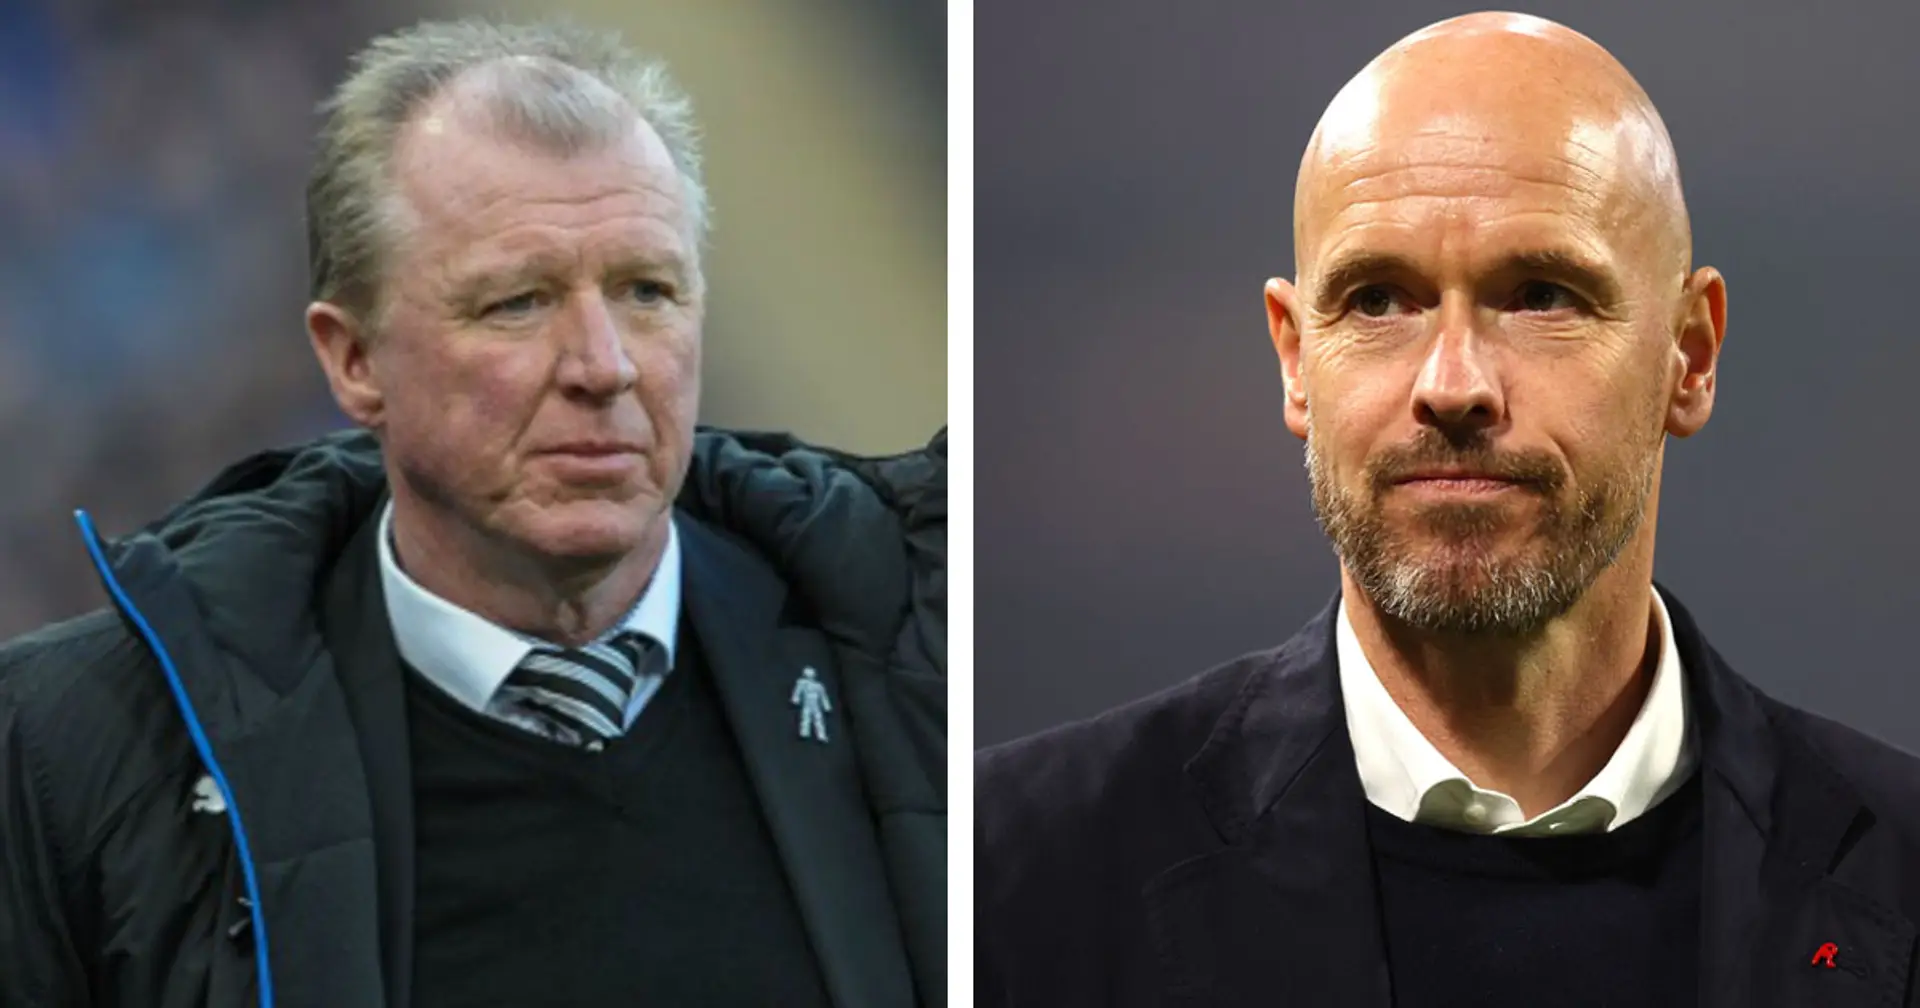 Steve McClaren set to return to United as part of Ten Hag's staff - his role revealed